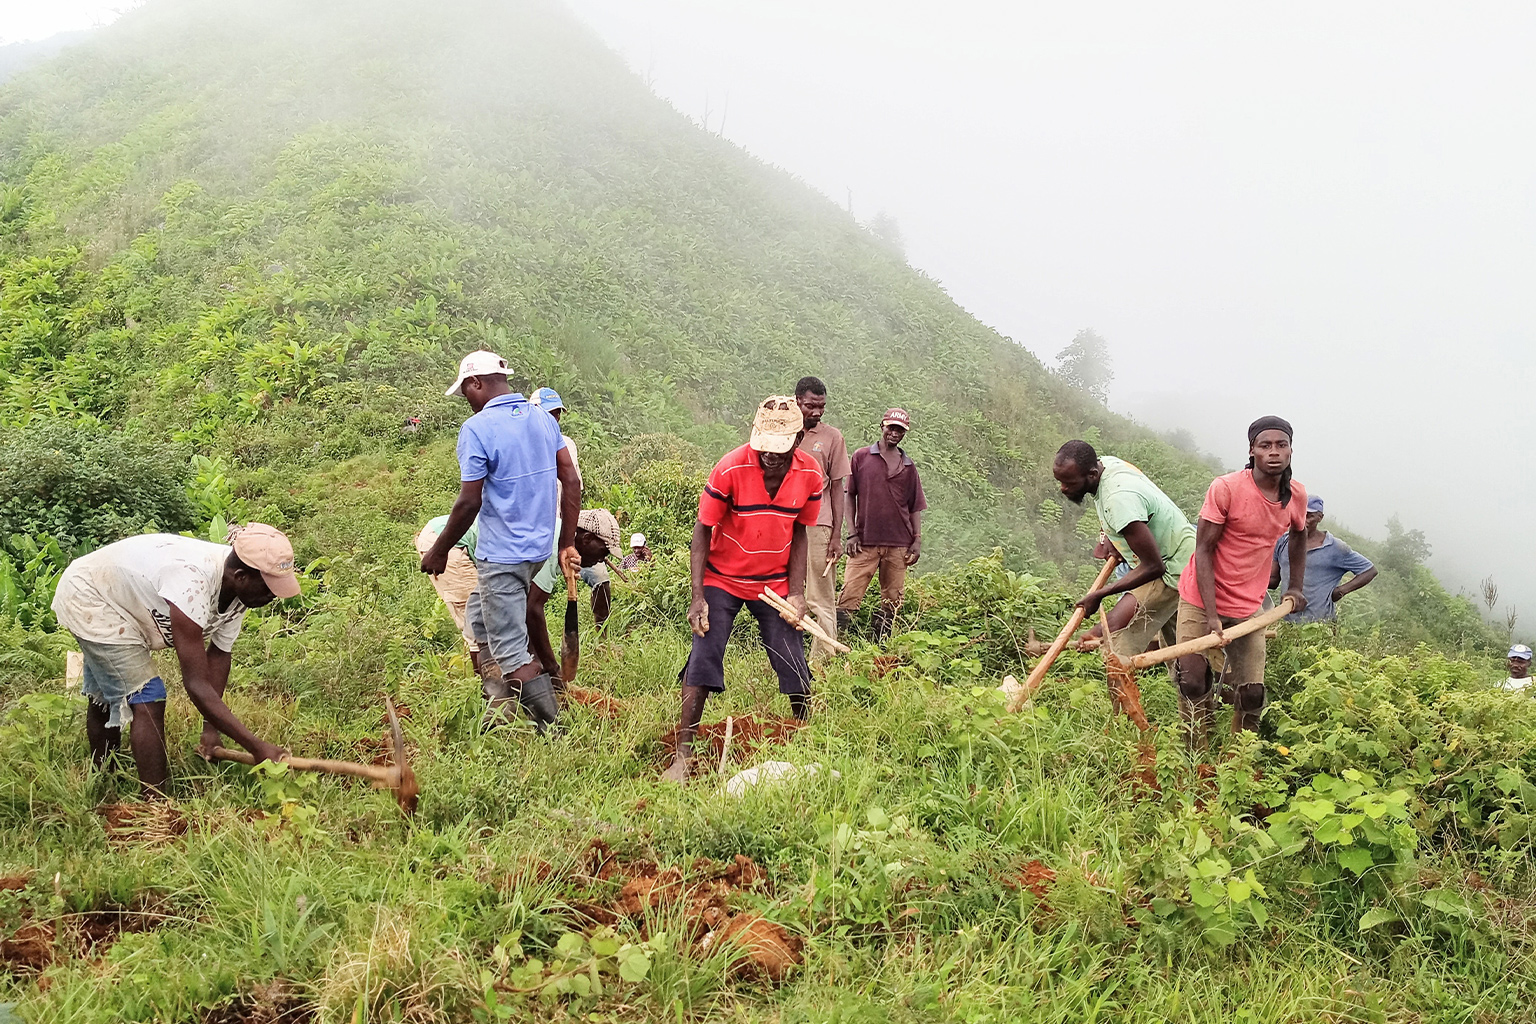 A work party restores native plants on a hill.